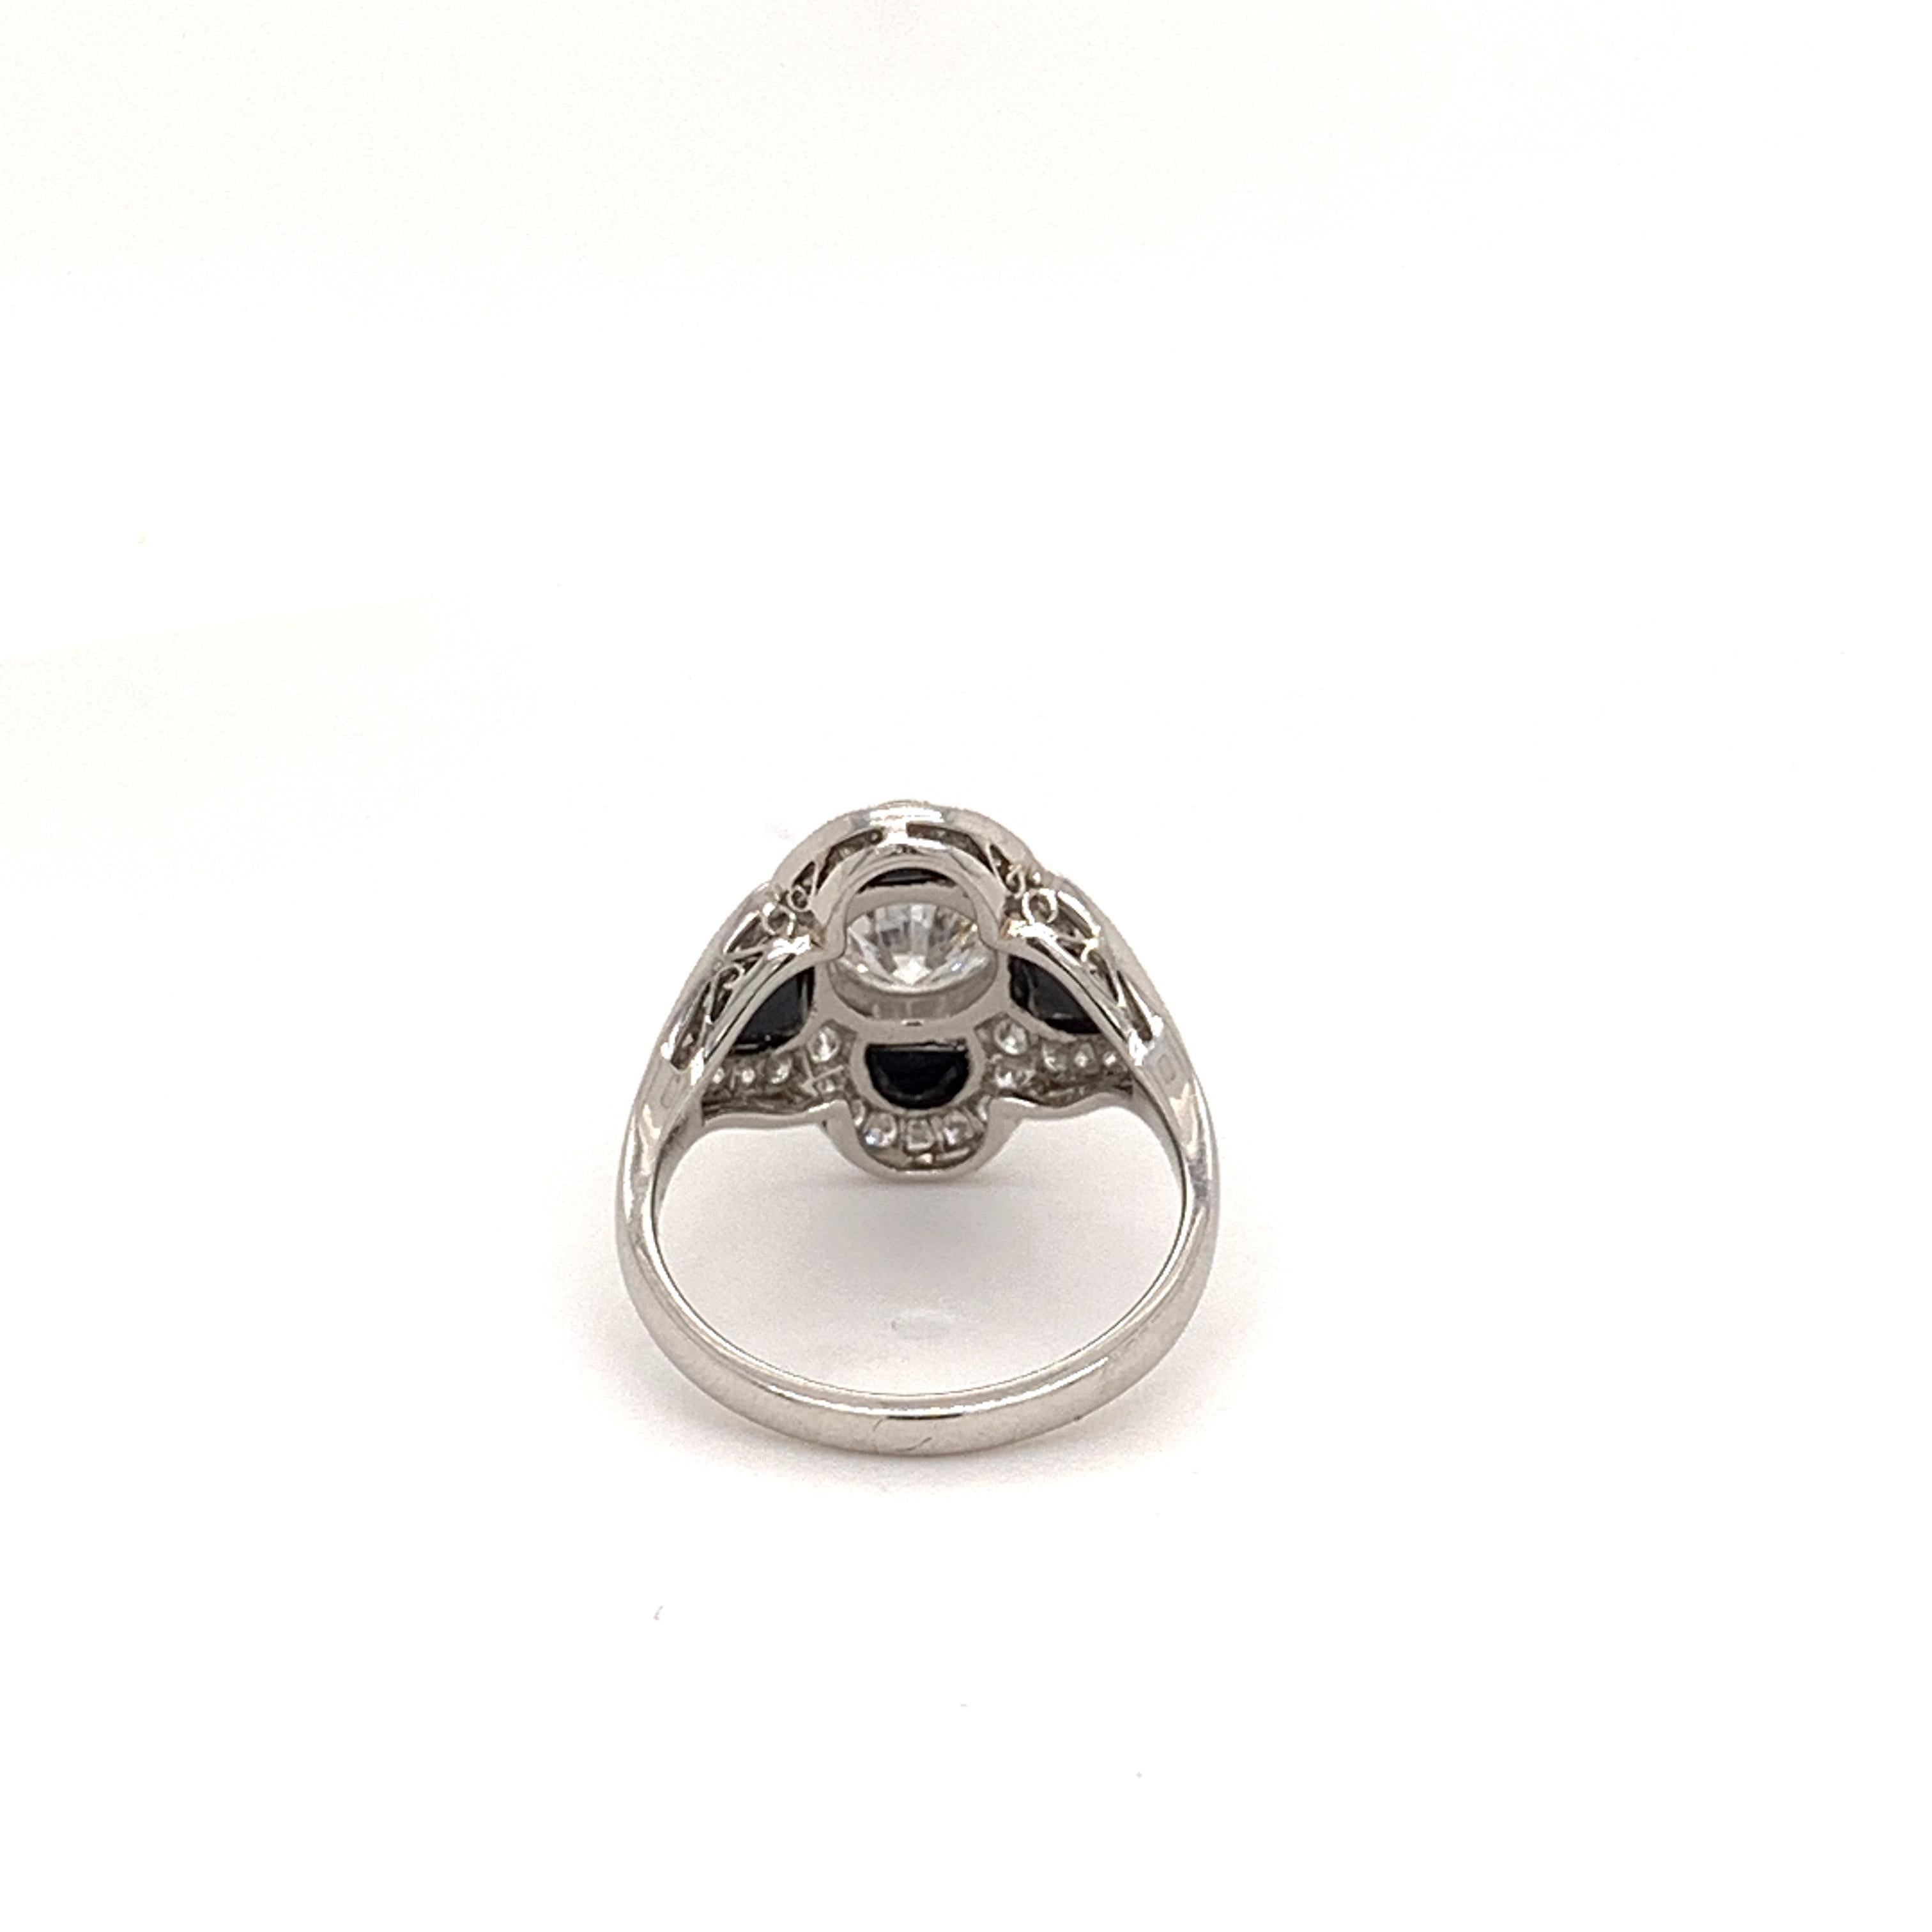 Art deco inspired platinum ring with center round diamond weighing 0.96 carats surrounded with onyx and brilliant diamonds weighing 0.54 carat. 

Sophia D by Joseph Dardashti LTD has been known worldwide for 35 years and are inspired by classic Art